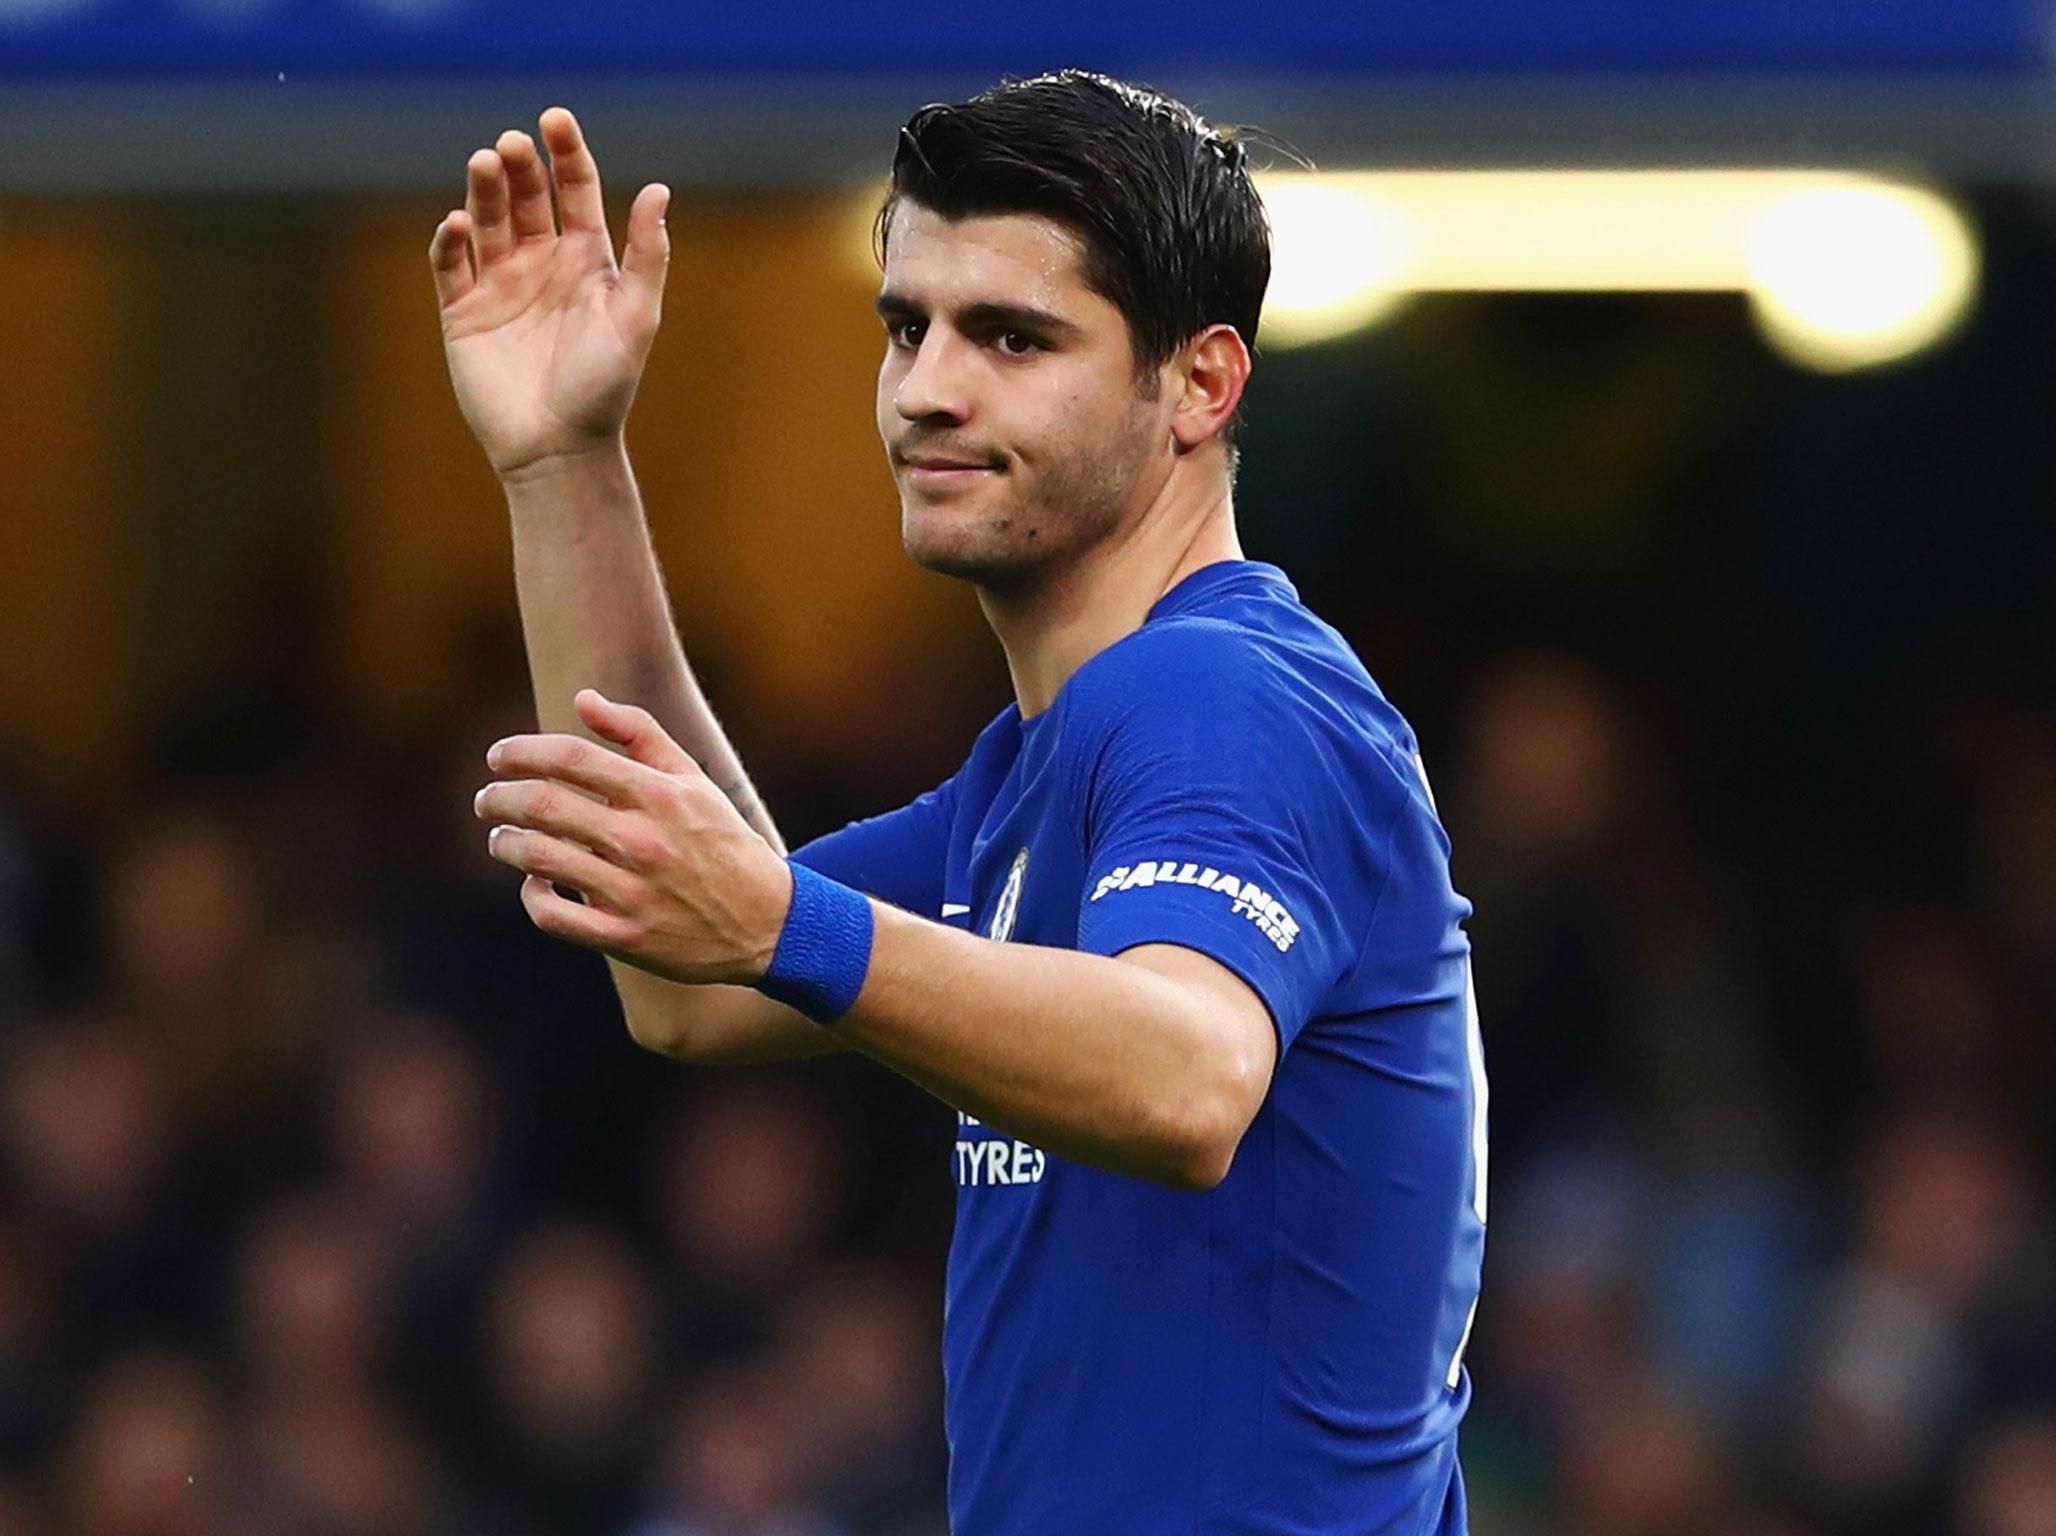 Alvaro Morata had a night to forget at the Emirates but all is not lost